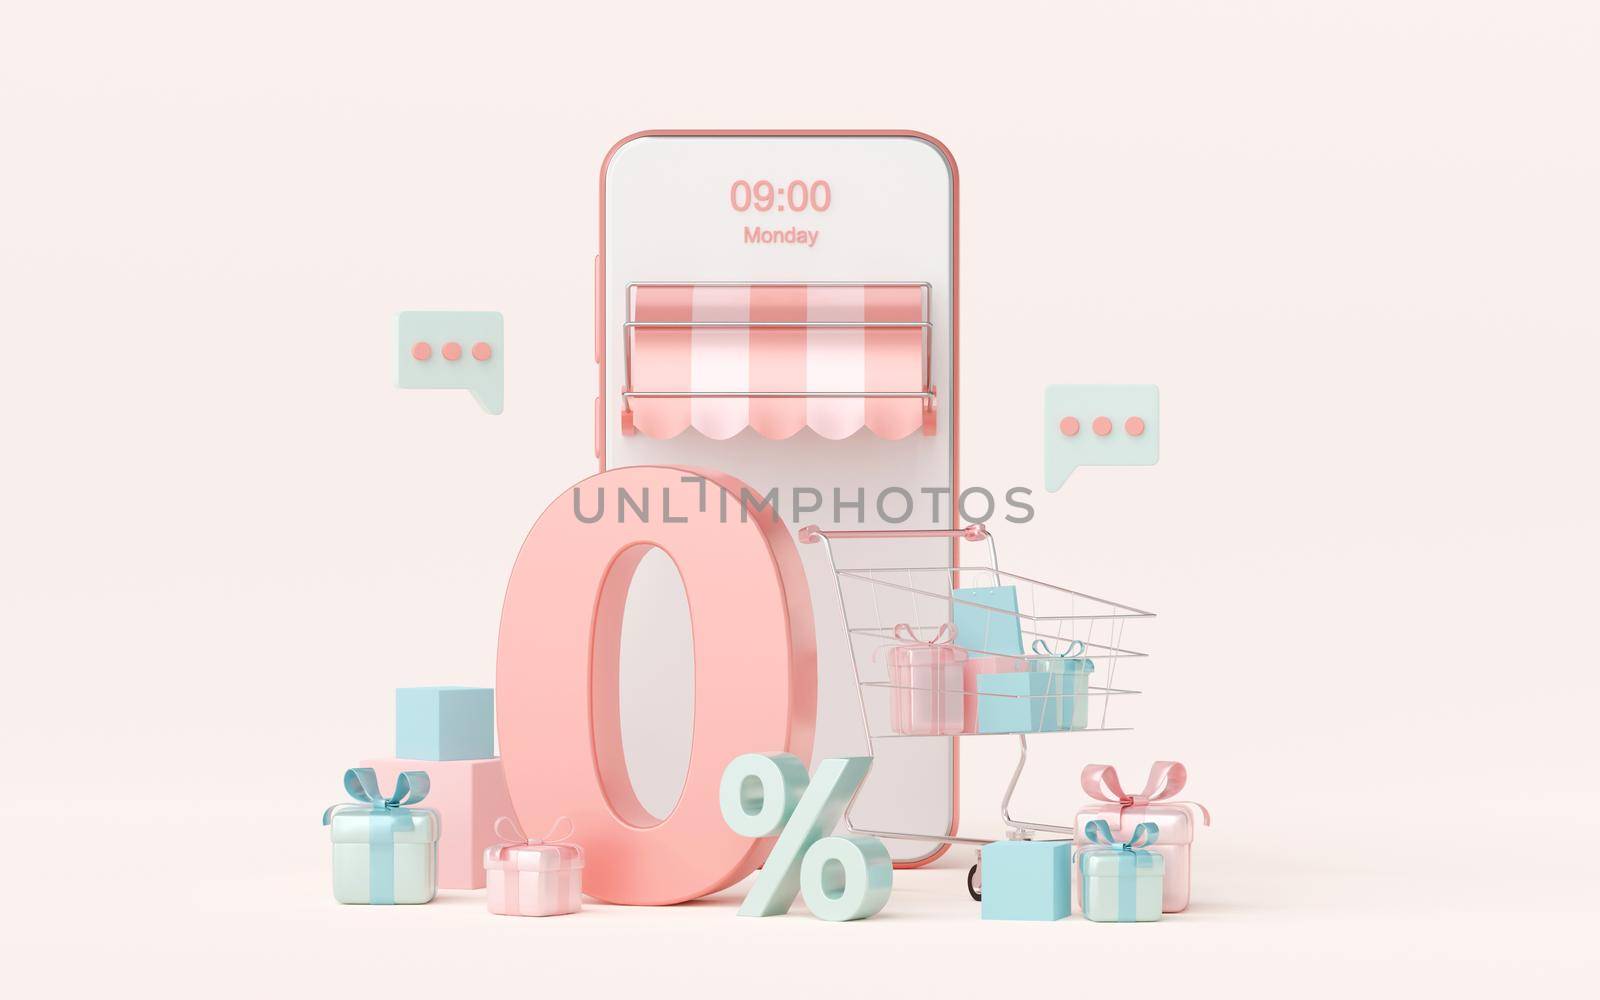 Shopping online using credit card with zero percent interest installment payments on smartphone, 3d illustration by nutzchotwarut